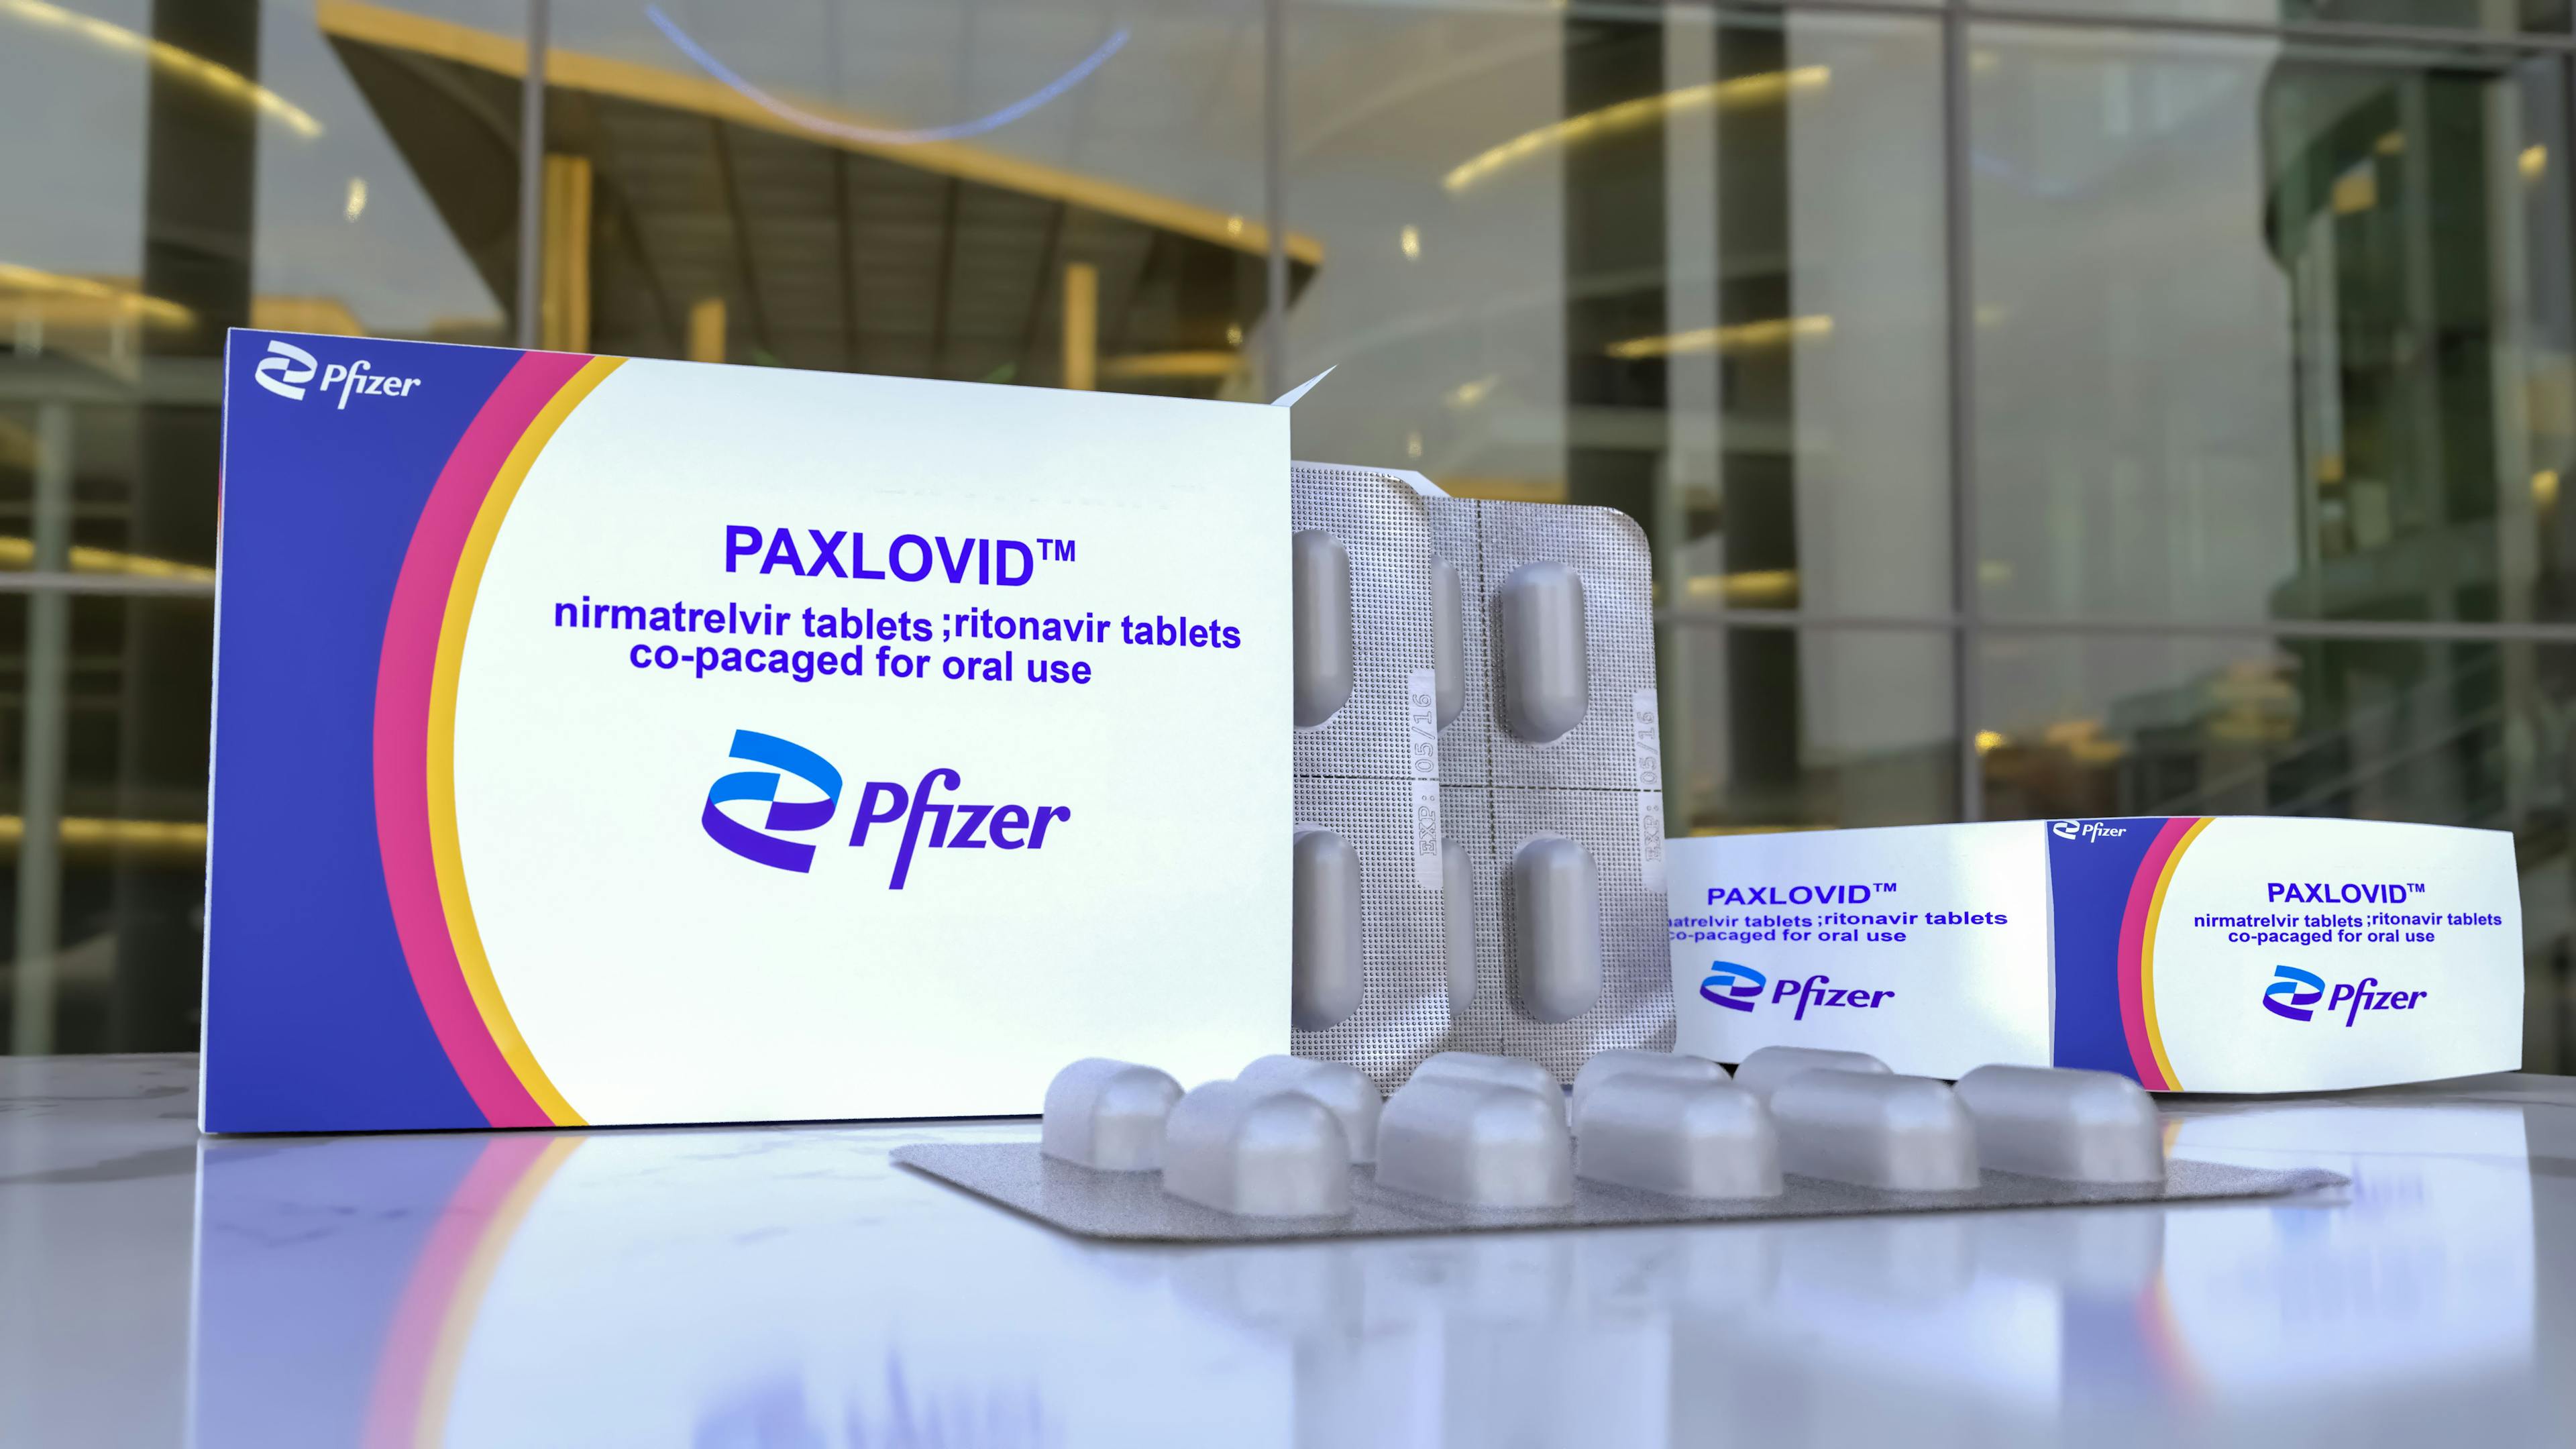 Paxlovid FDA Approved as First Oral Antiviral COVID-19 Treatment in Adults